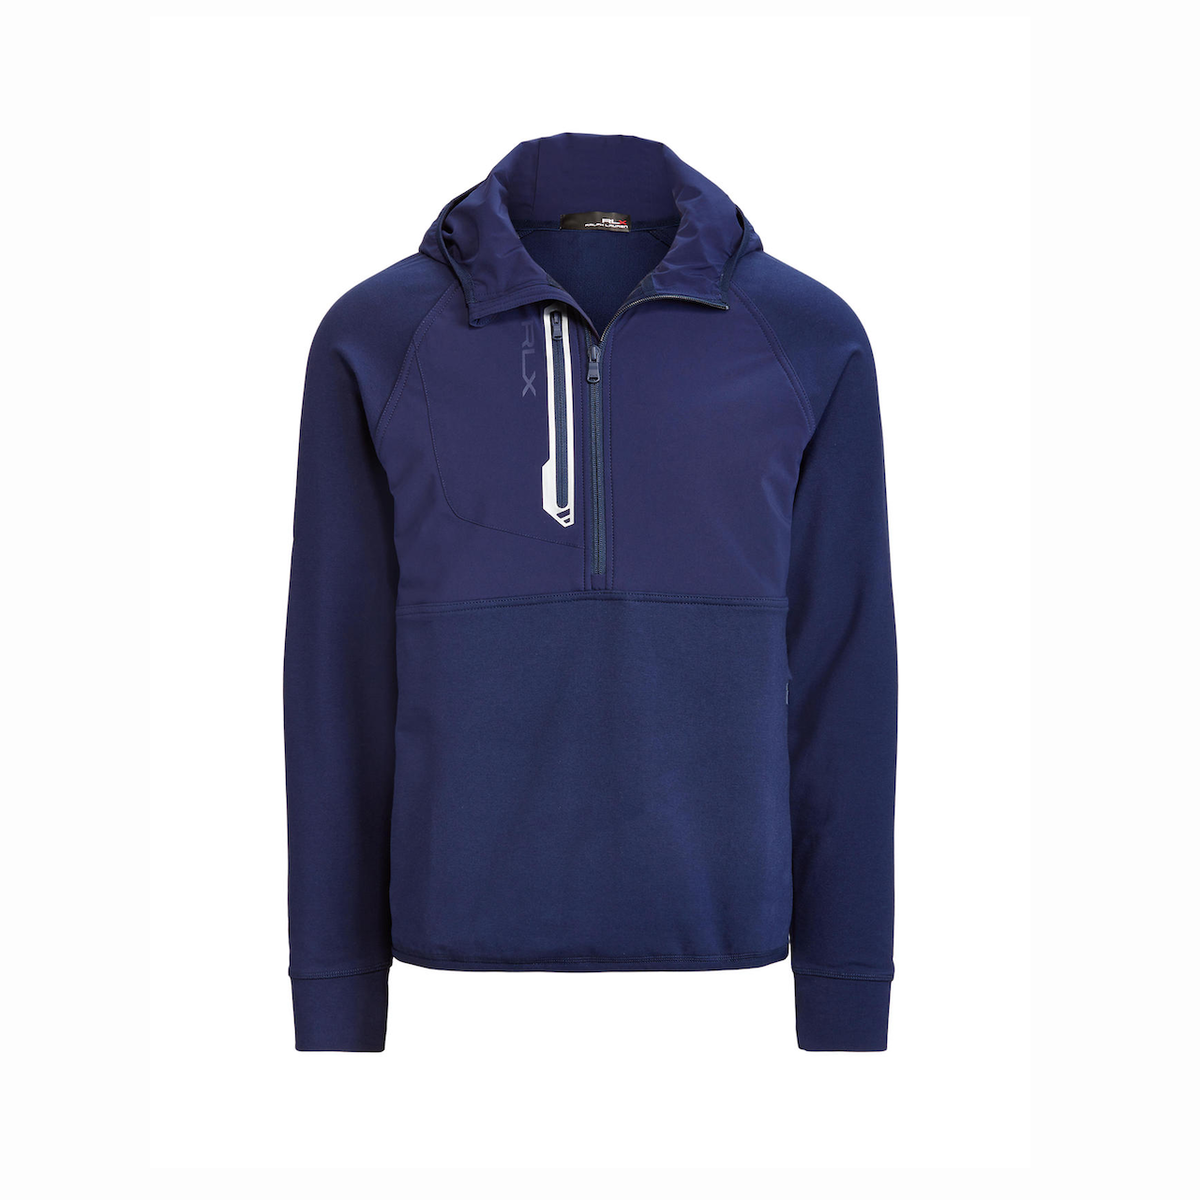 Do Golf Hoodies Hit the Mark? Pros, Cons and Top Picks Golflink.com